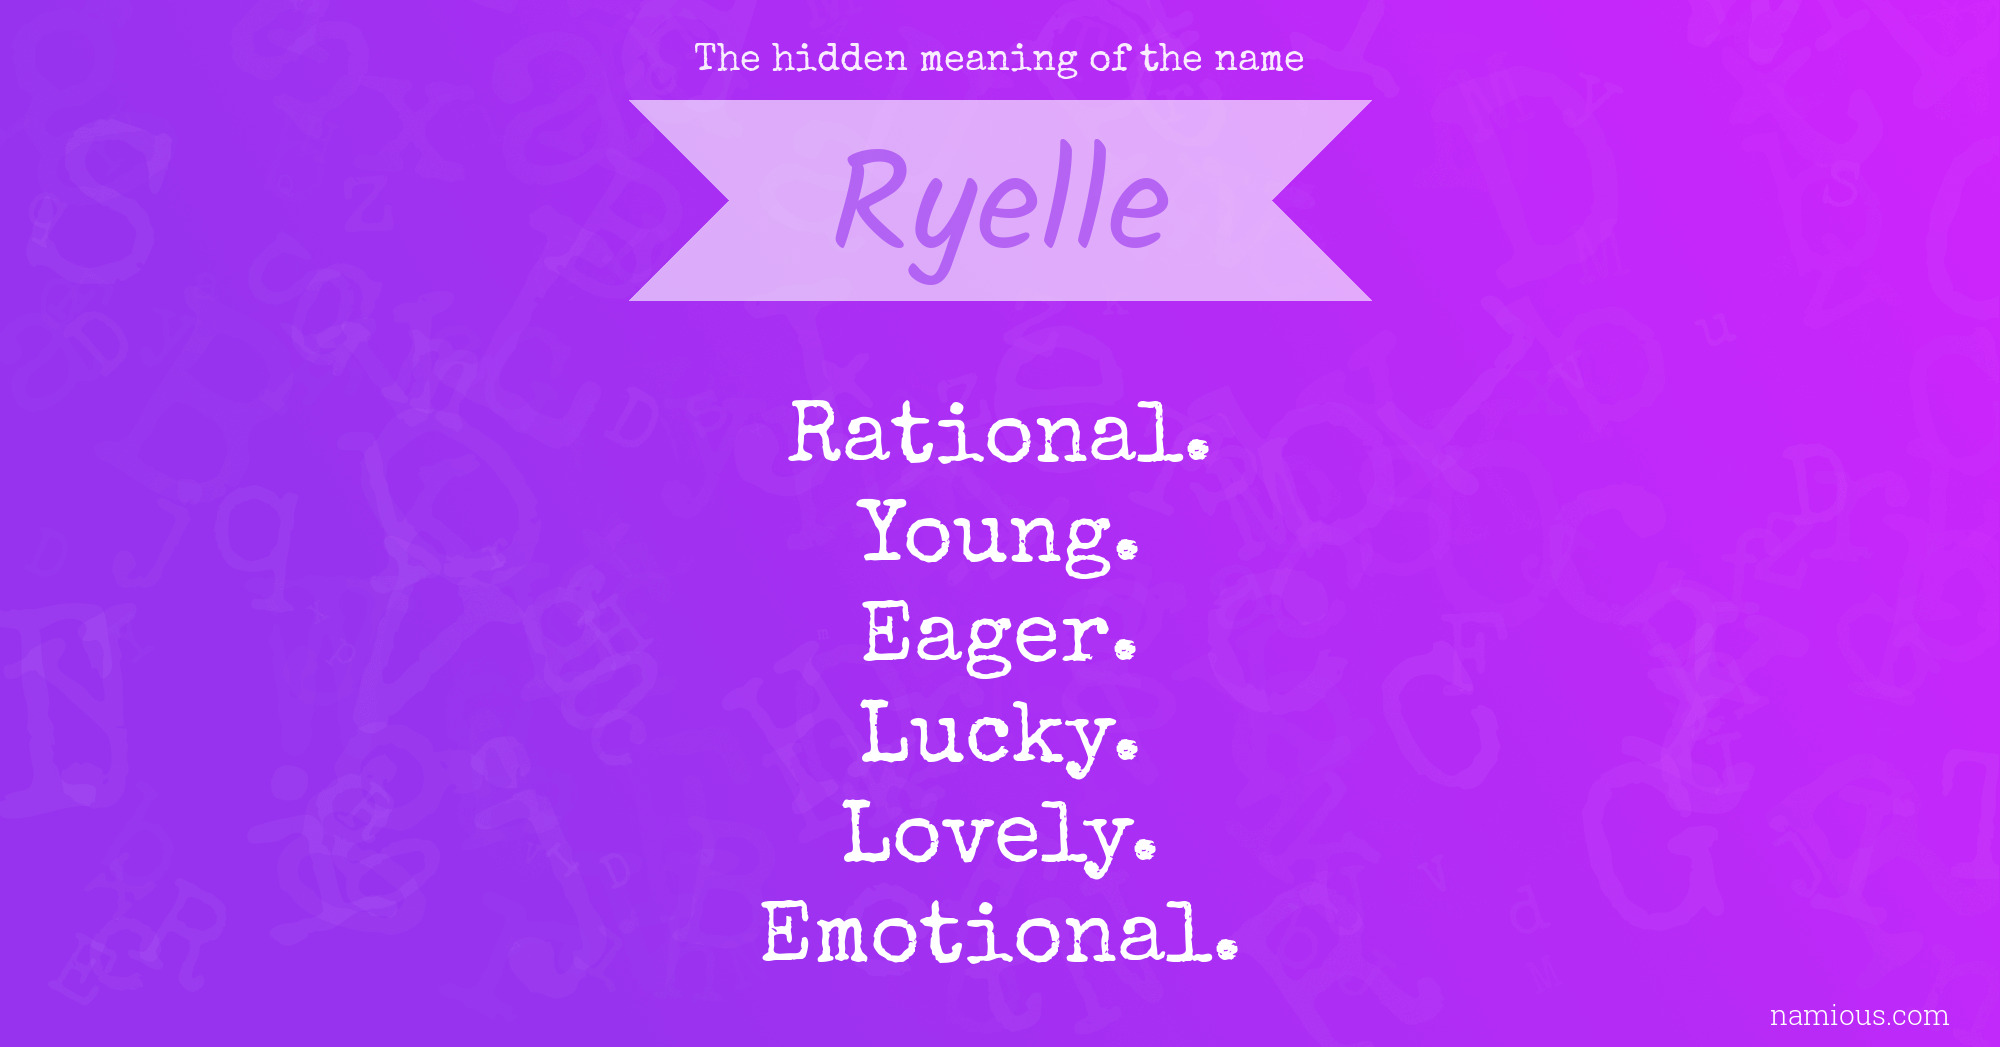 The hidden meaning of the name Ryelle